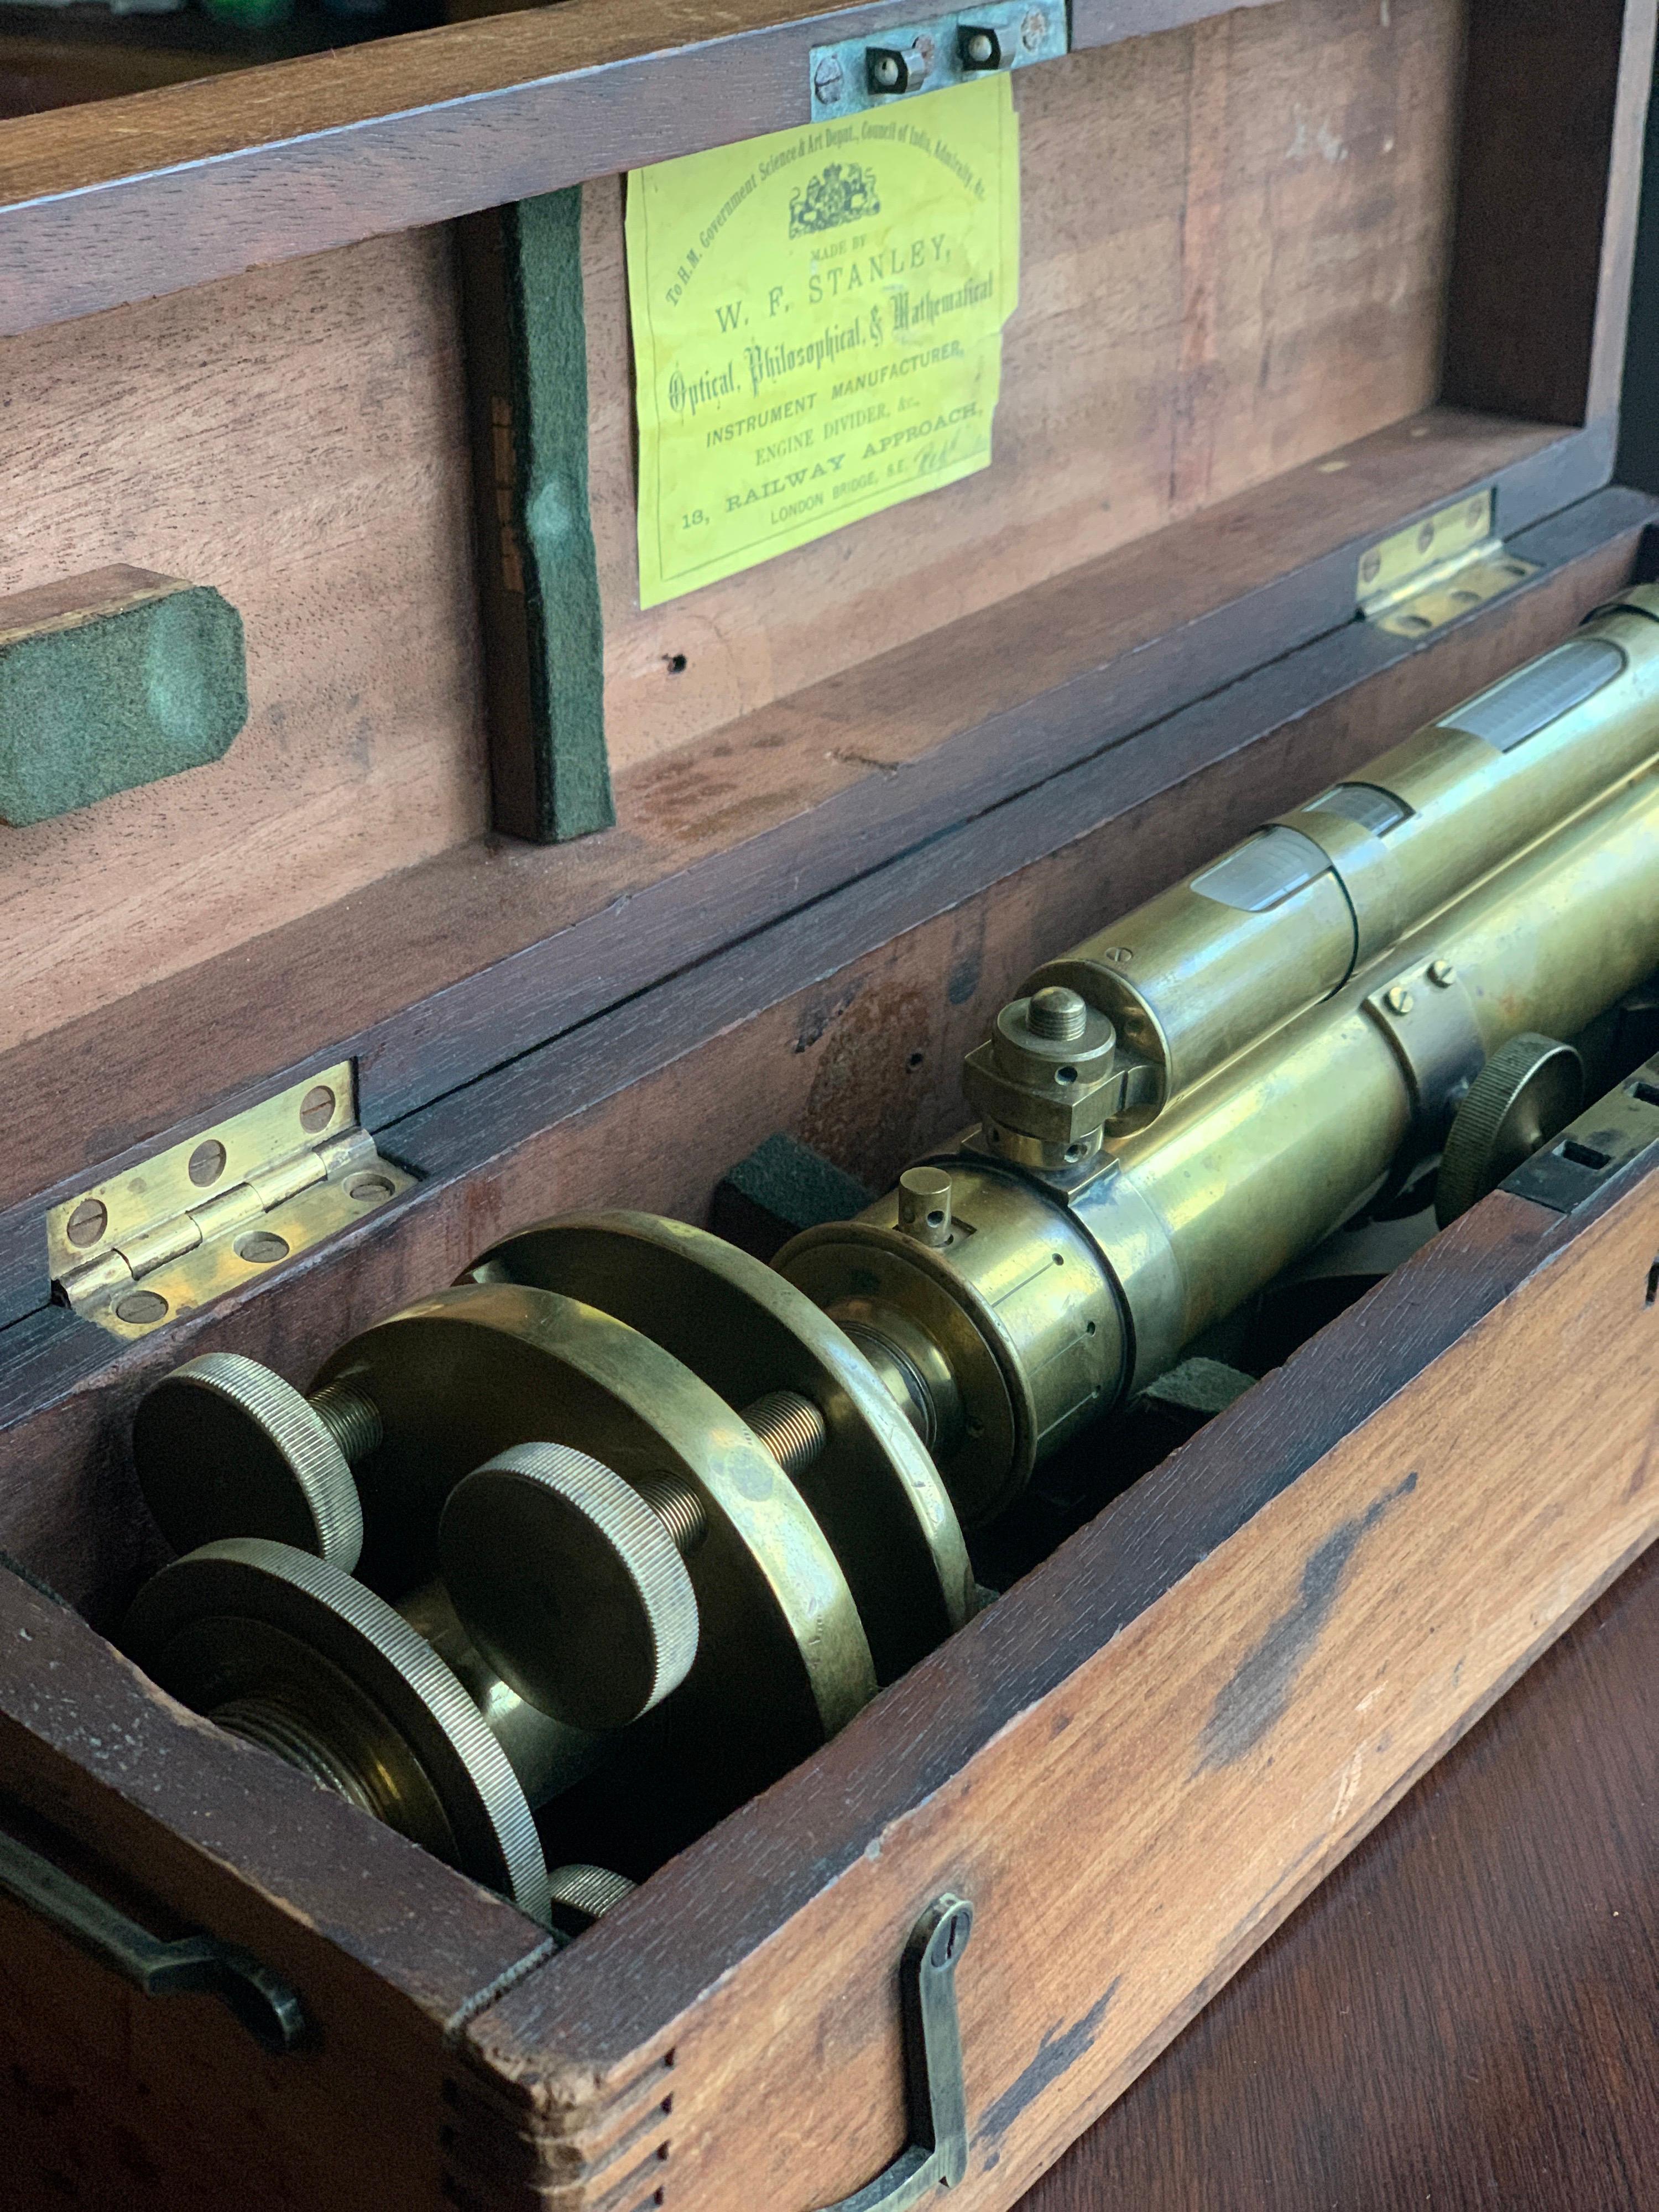 Brass 20th Century English Theodolite by W.F. Stanley London in Original Wooden Box For Sale